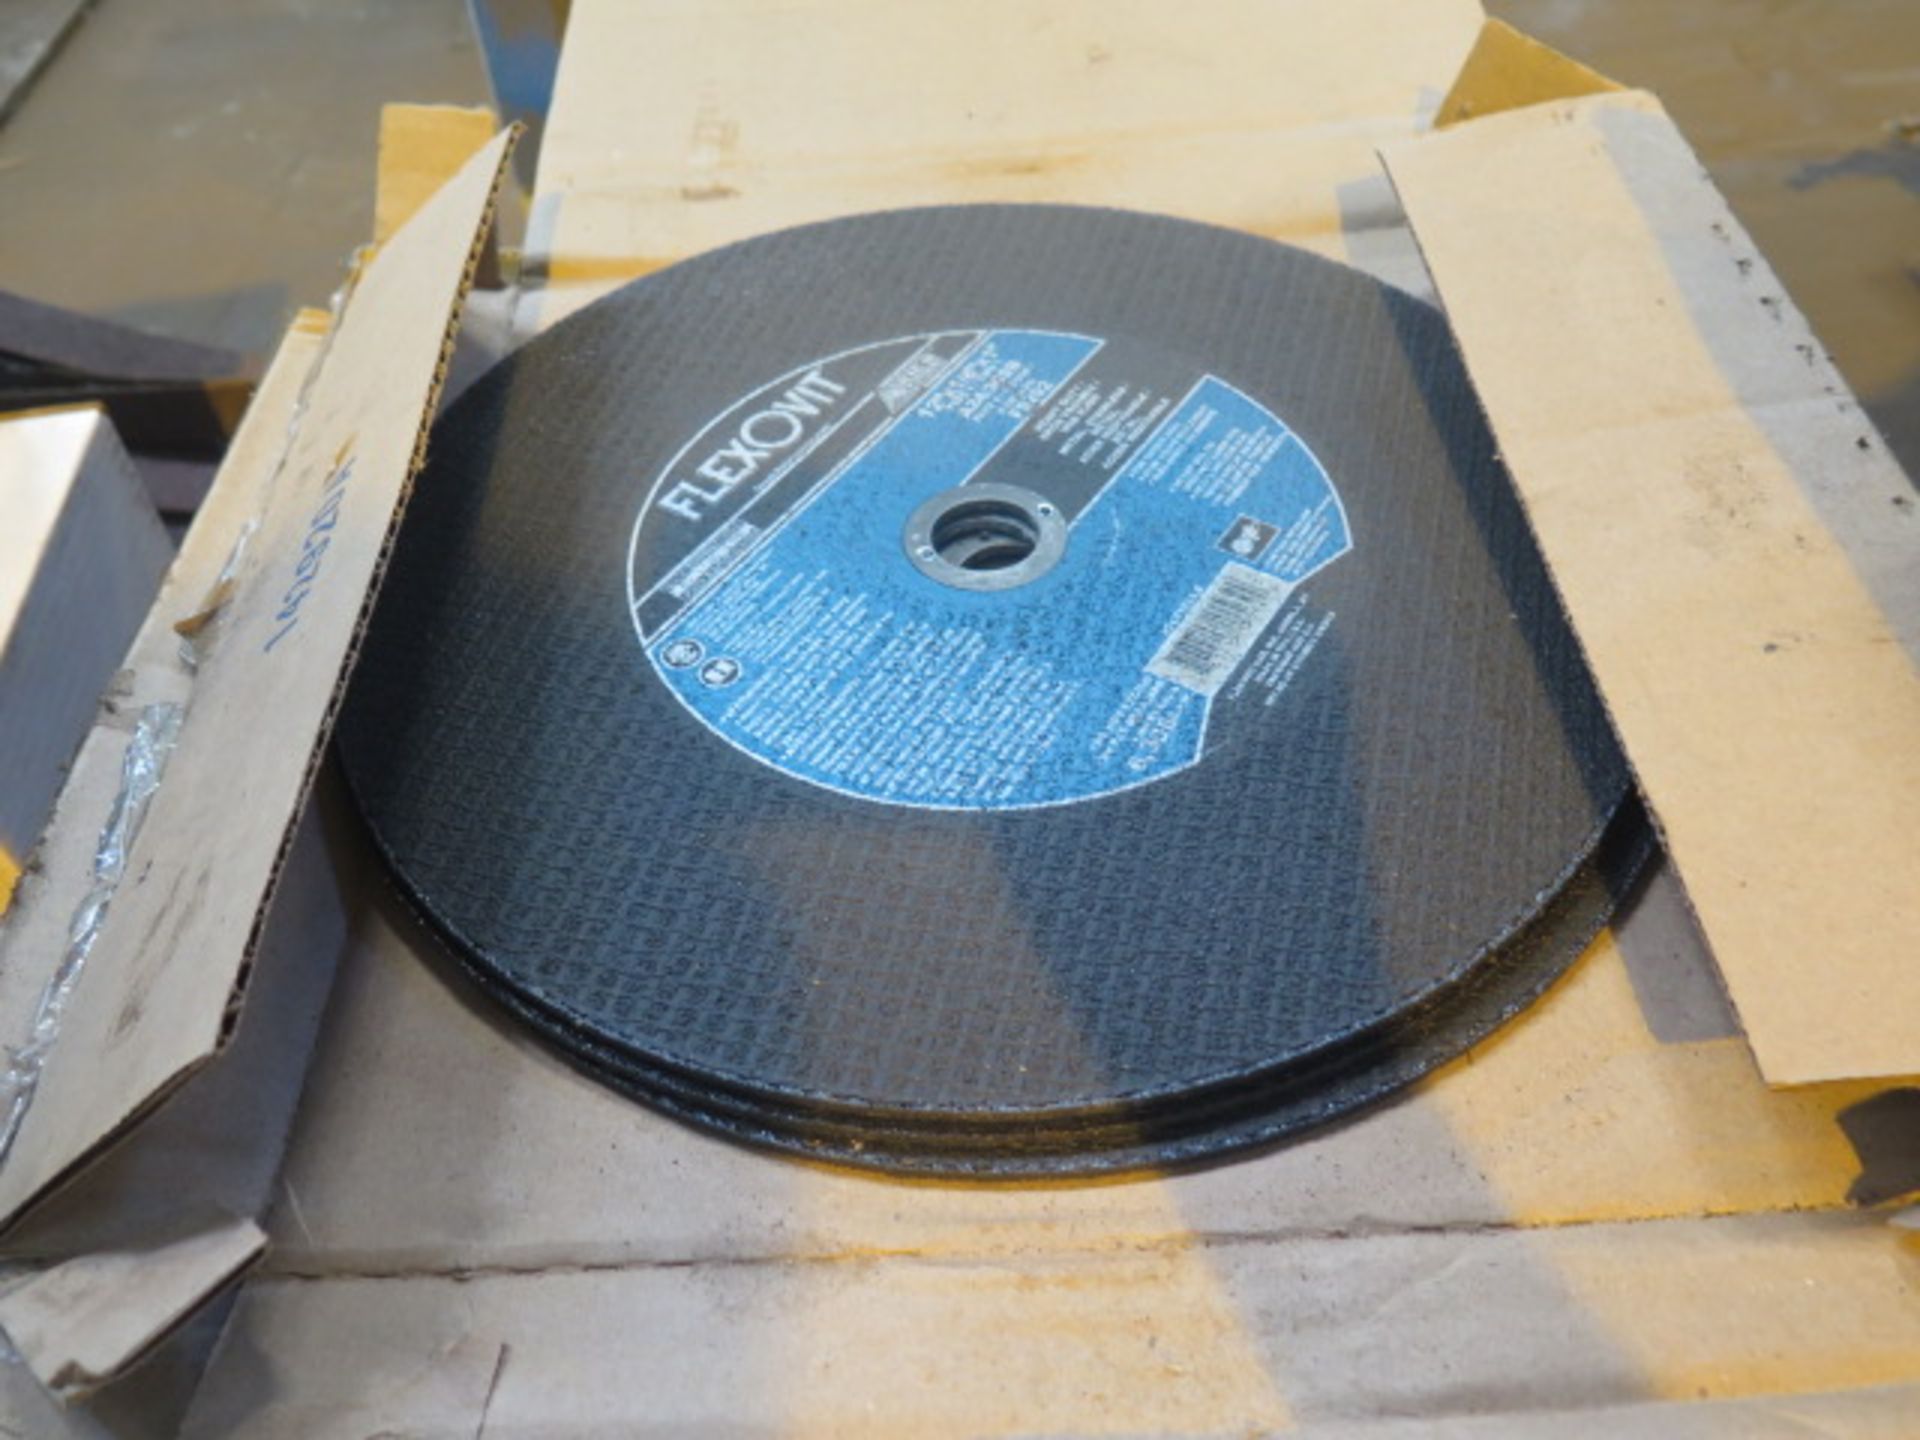 14" Abrasive Cutoff Blades and Sanding Belts - Image 2 of 3